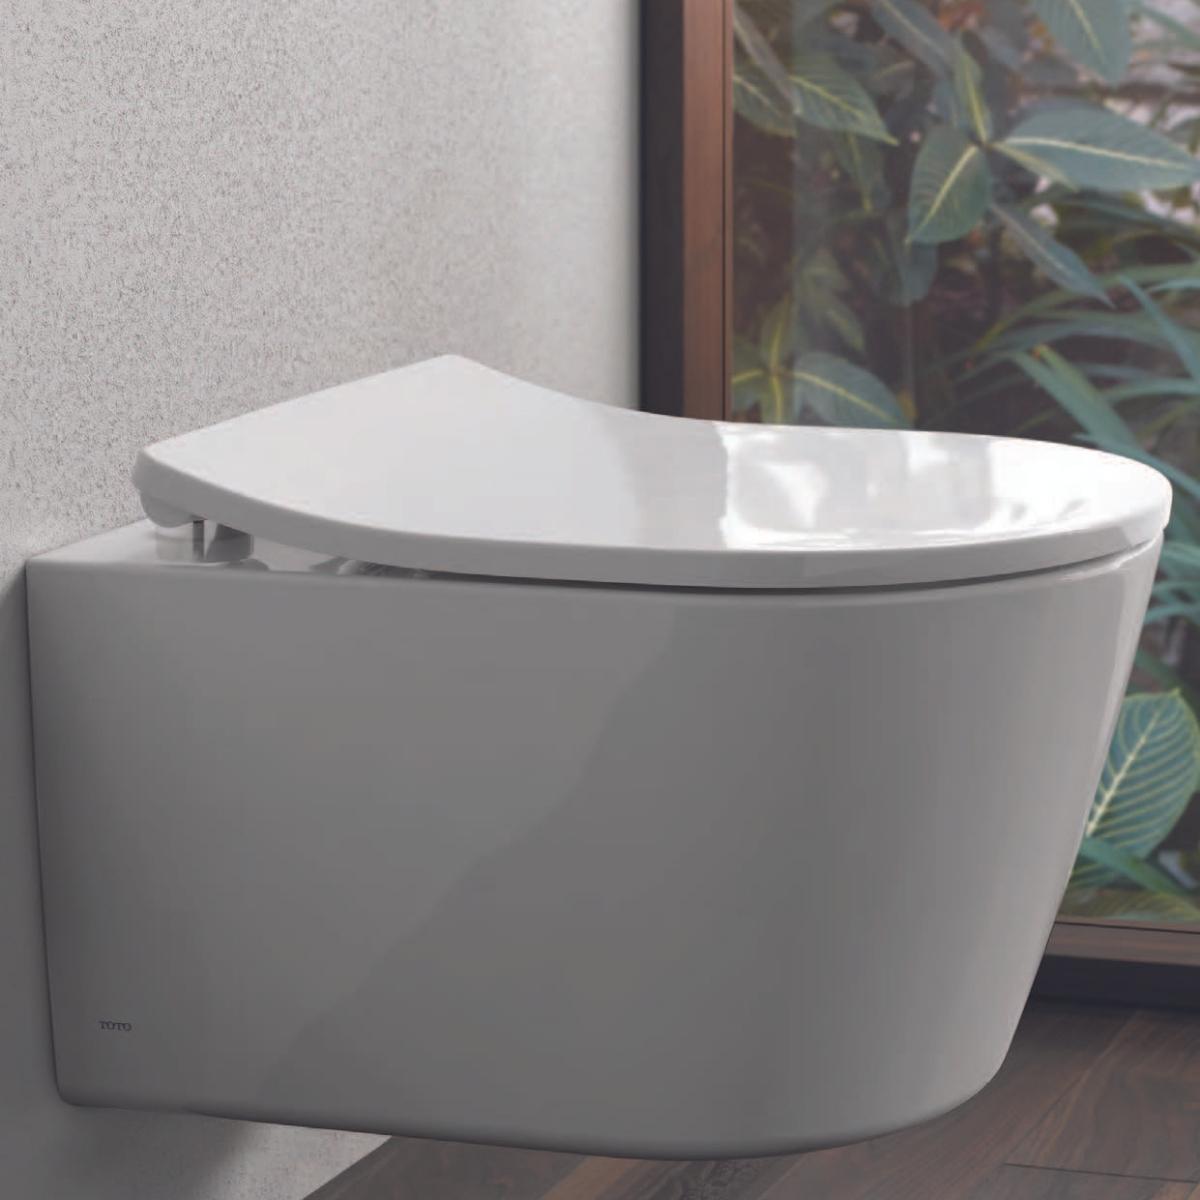 TOTO CONTEMPORARY I WALL HUNG TOILET (D-SHAPE) GLOSS WHITE